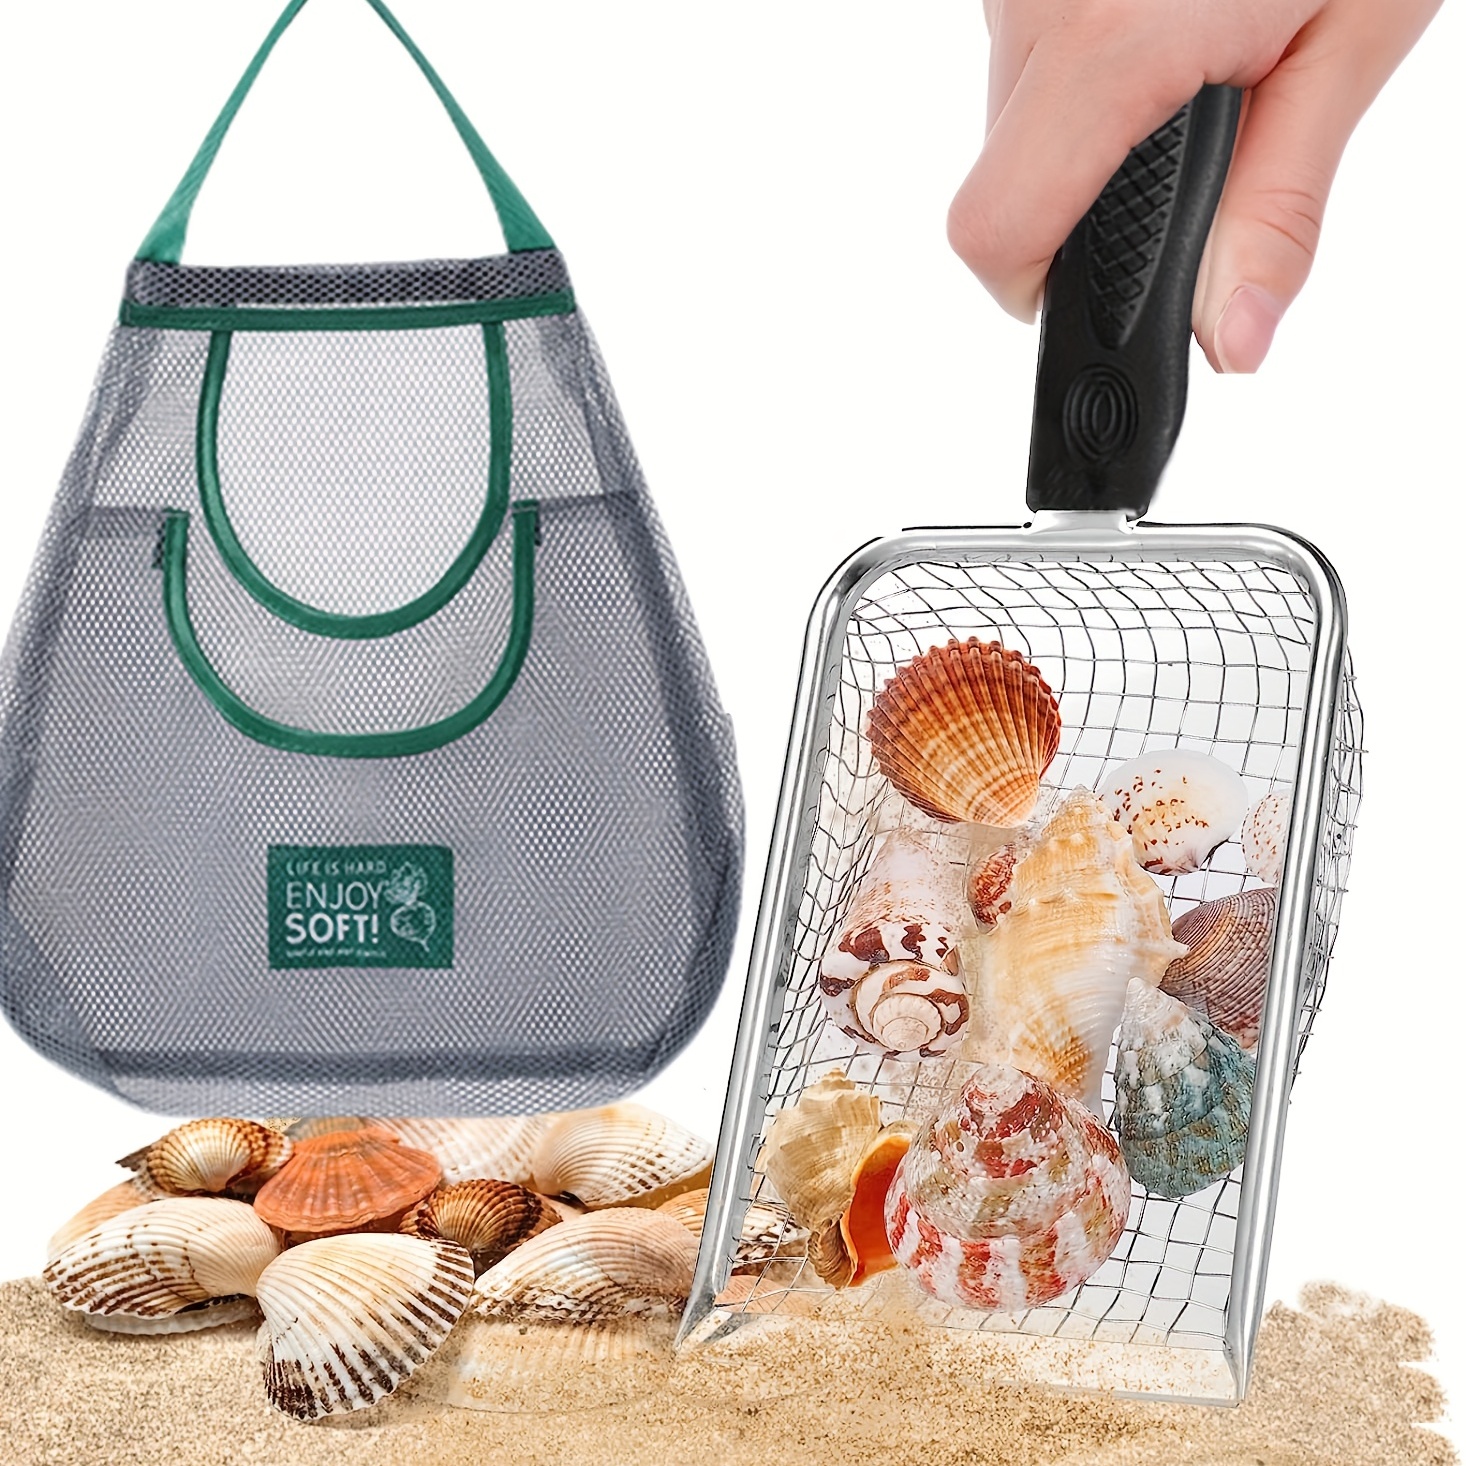 

Beach Mesh Shovel With Mesh Beach Bag Shovels For Shell Collecting, Sand Sifter For Shark Teeth, Sand Scooper Beach Toys For Picking Up Shells